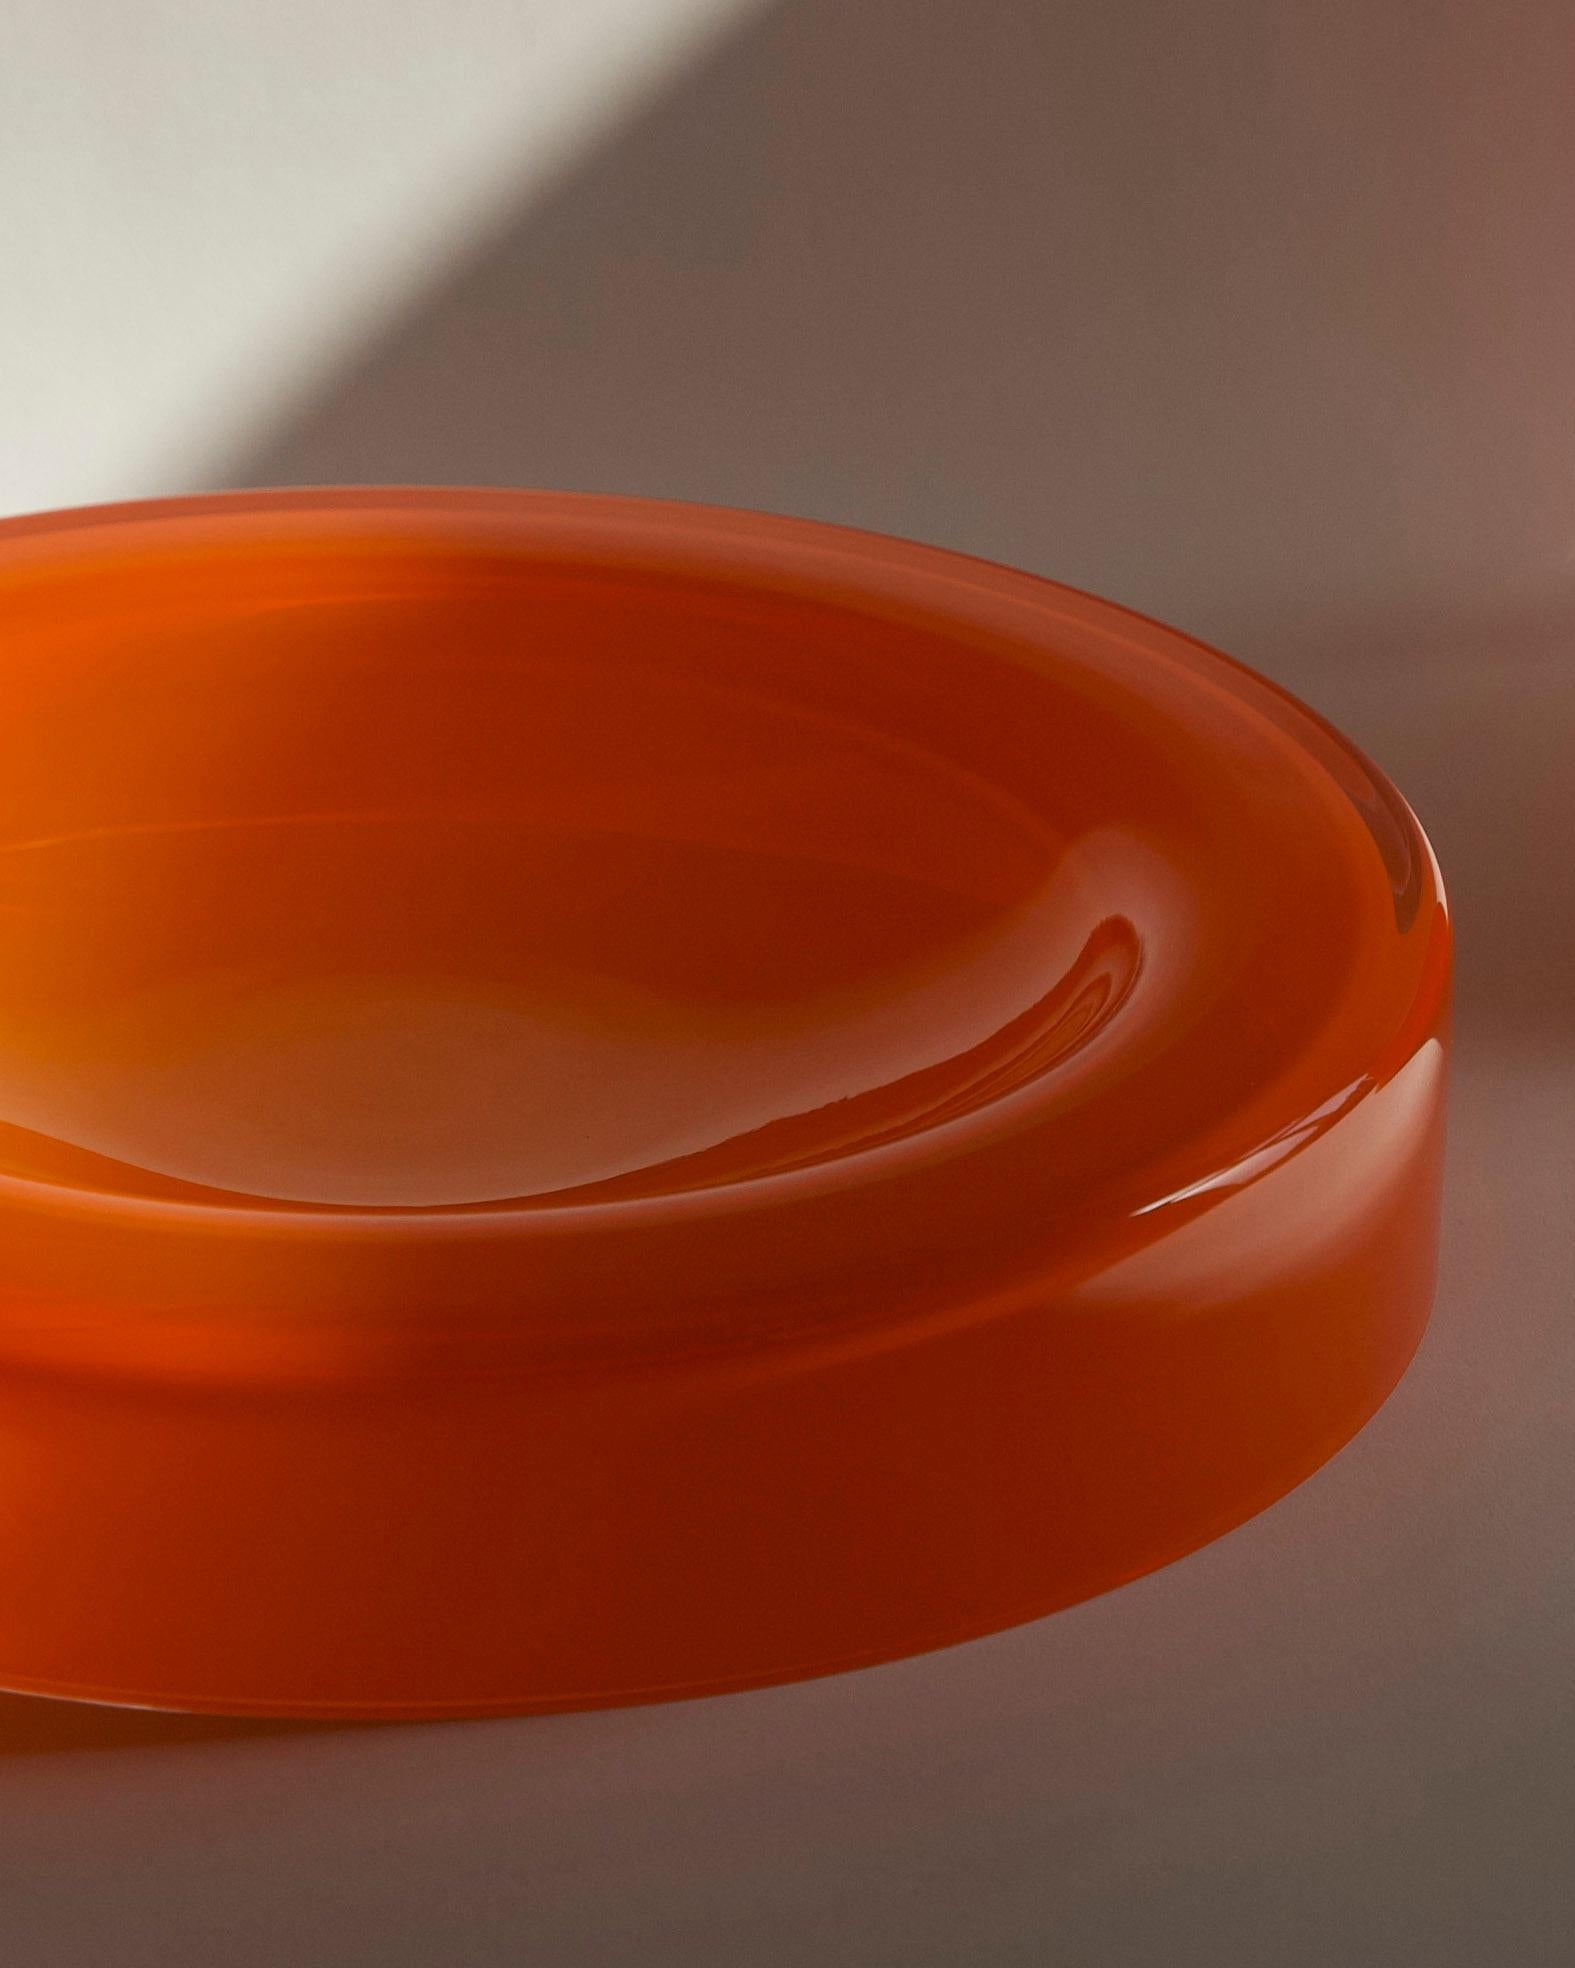 Hand-Crafted Mouthblown Glass Bowl from Bohemian Crystal, Fiery Orange by Ursula Futura For Sale